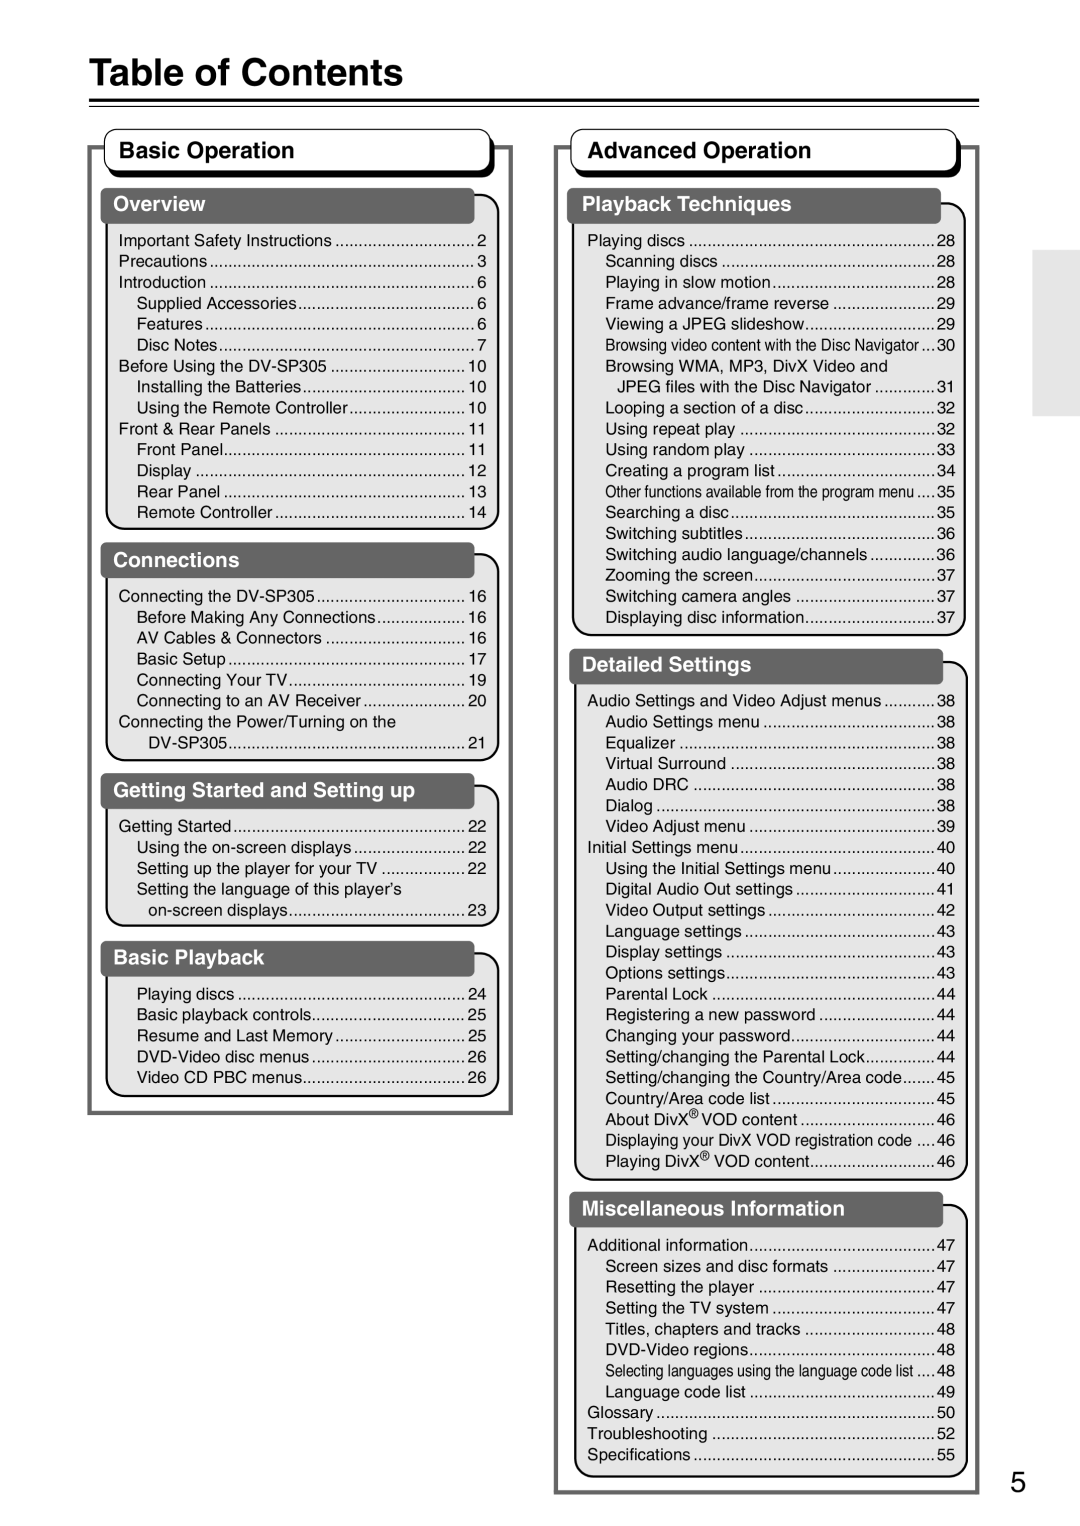 Onkyo DV-SP305 instruction manual Table of Contents 